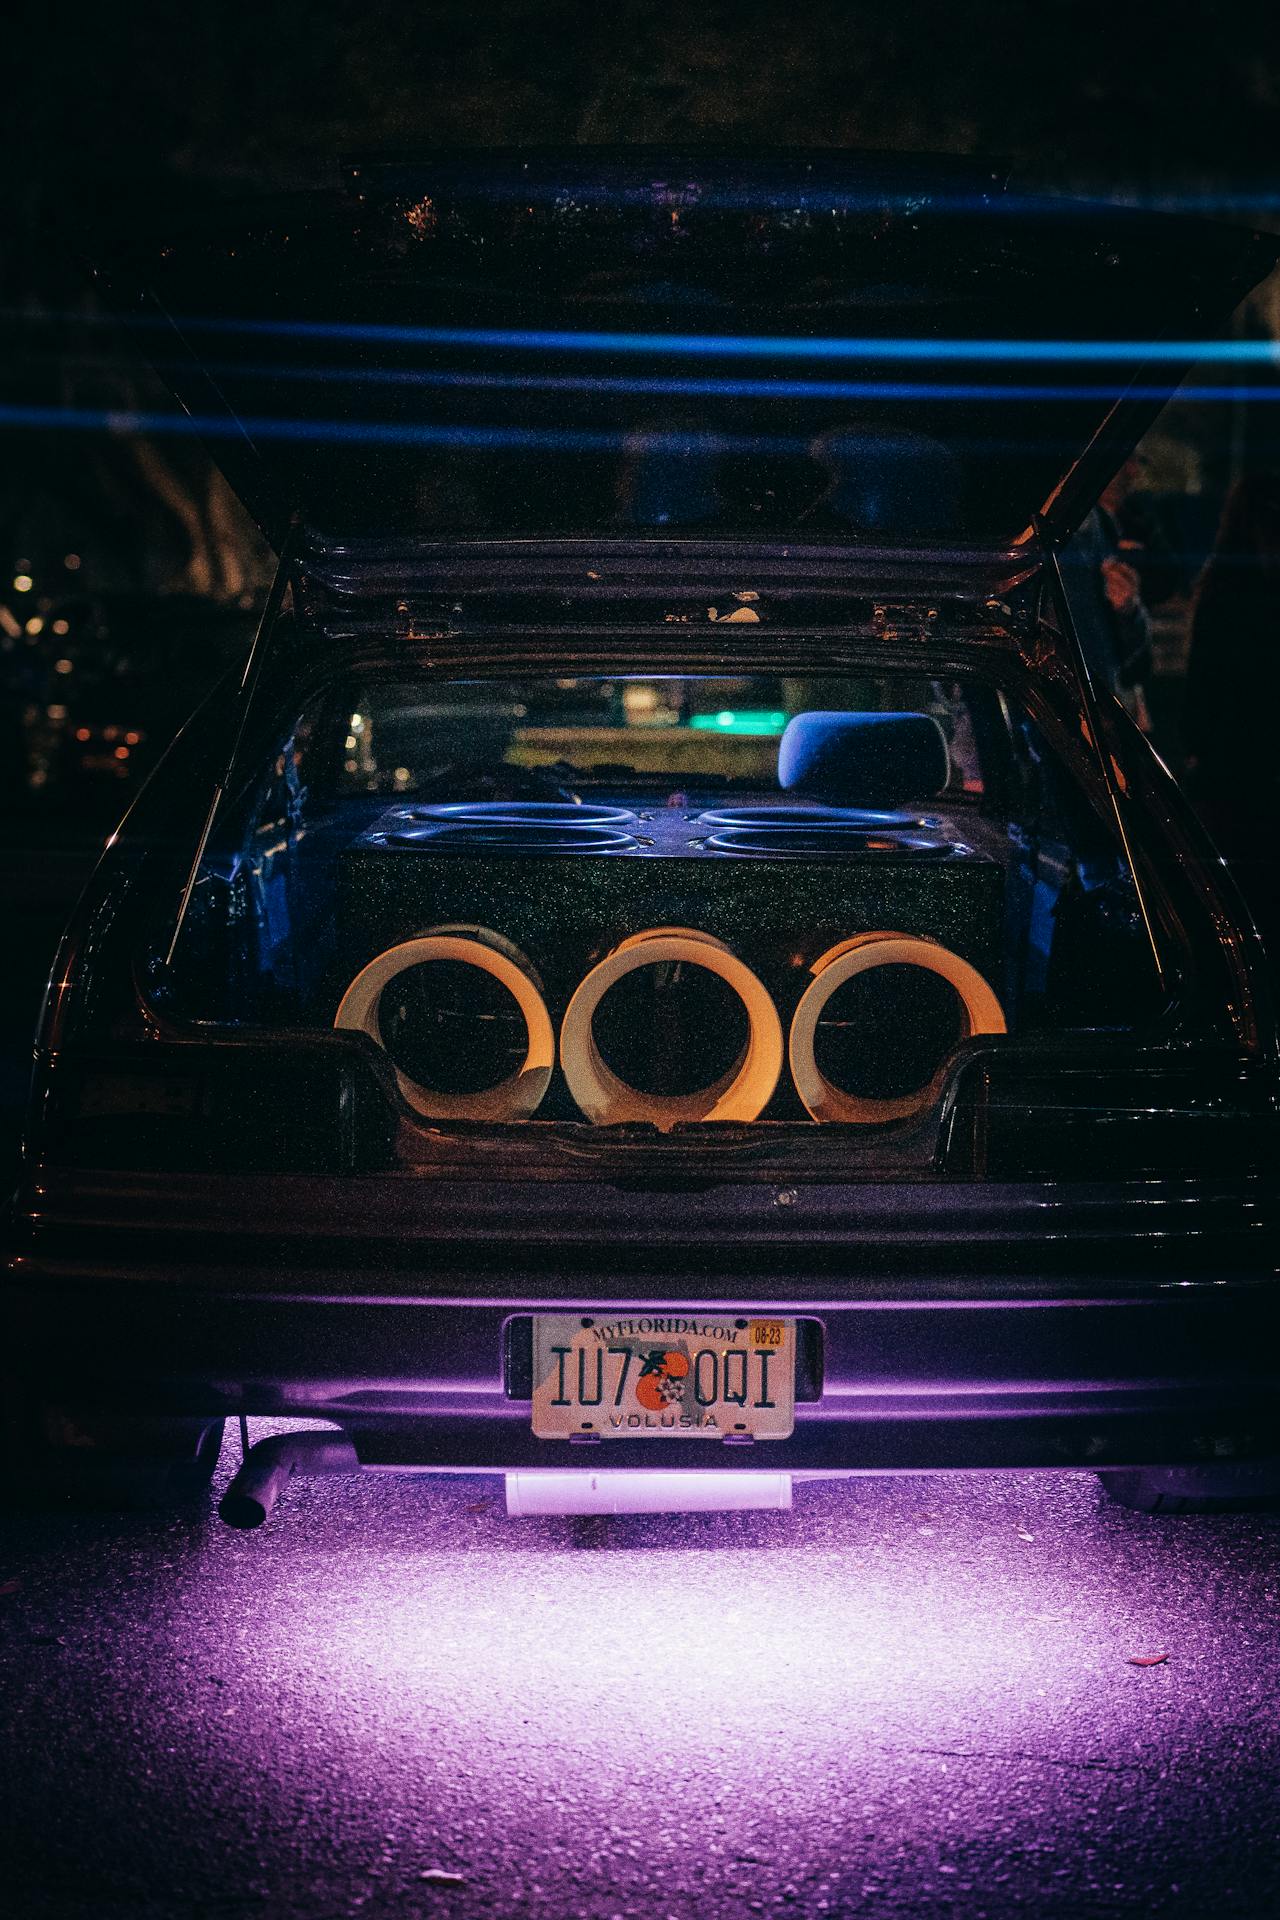 https://www.pexels.com/photo/large-speakers-in-the-car-trunk-and-an-led-light-under-the-car-15646676/